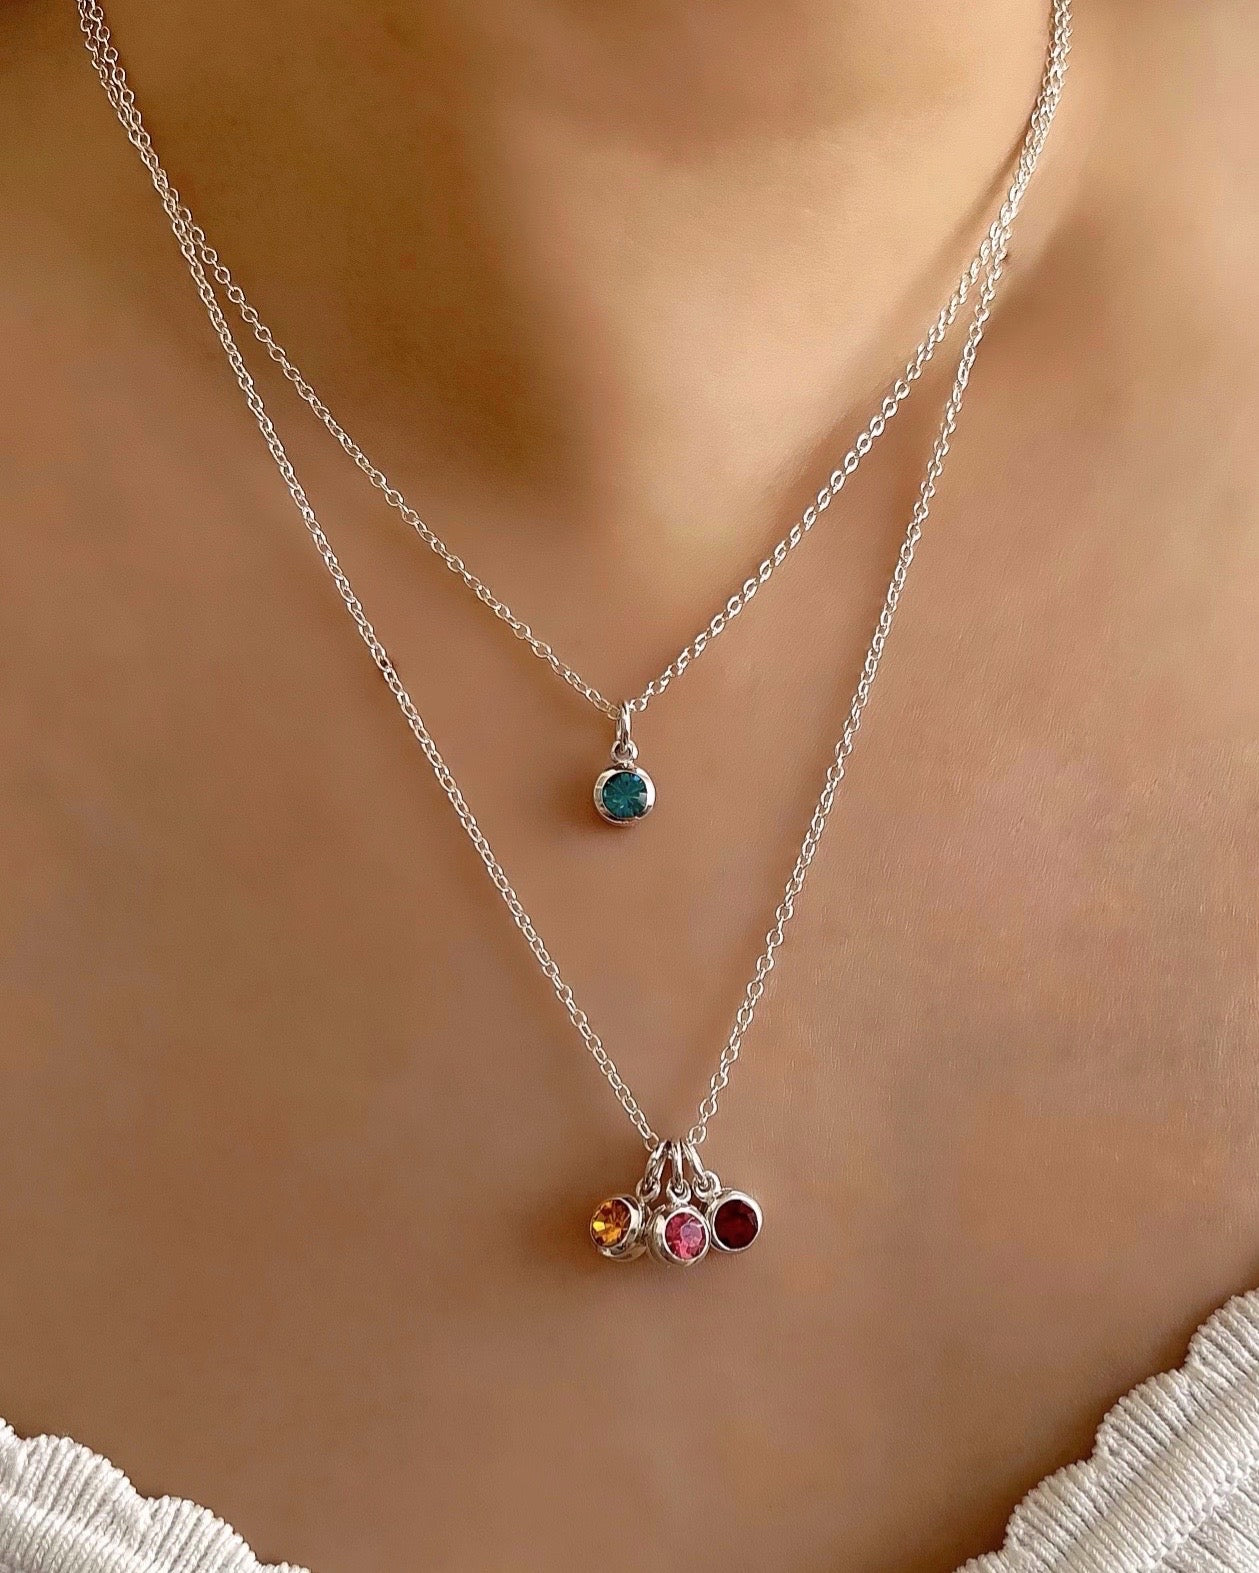 Sterling Silver Birthstone Necklace in May Emerald birthstone, November Citrine birthstone, Pink tourmaline October birthstone and January red garnet birthstone on a model 